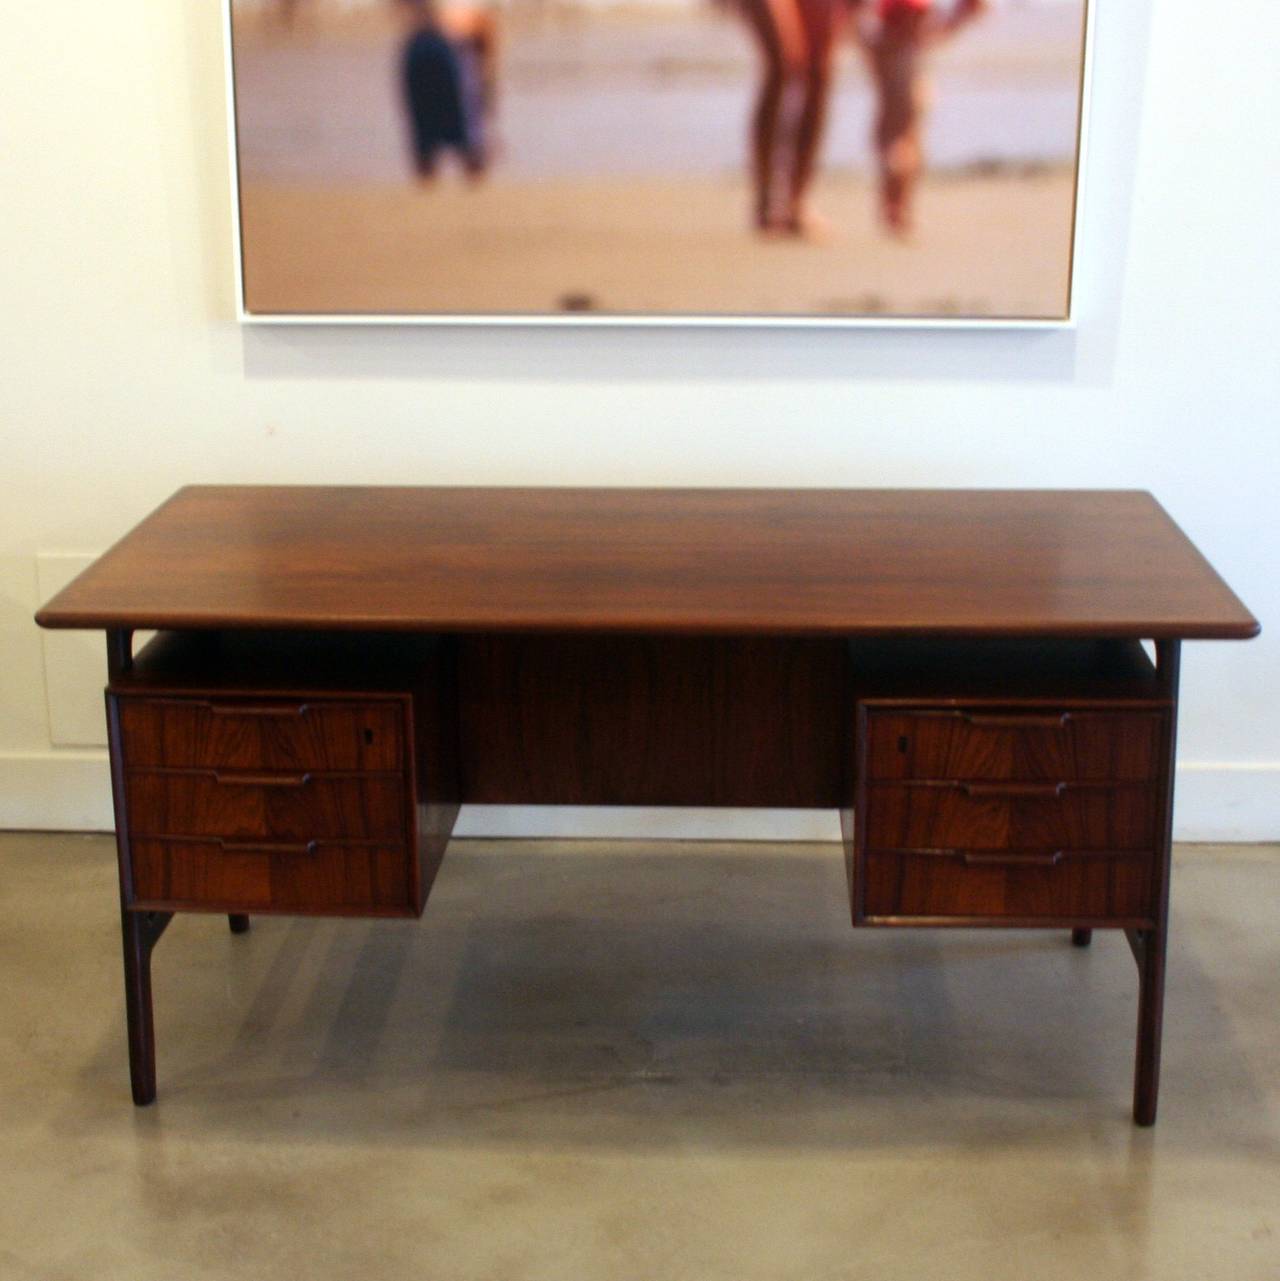 Classic Danish desk design masterfully crafted in Brazilian rosewood with sculptural legs framing the double drawer pedestals. Six dove-tailed drawers with curved pulls that fit the hand just right. A rear drop-down cabinet is nestled between cubbie